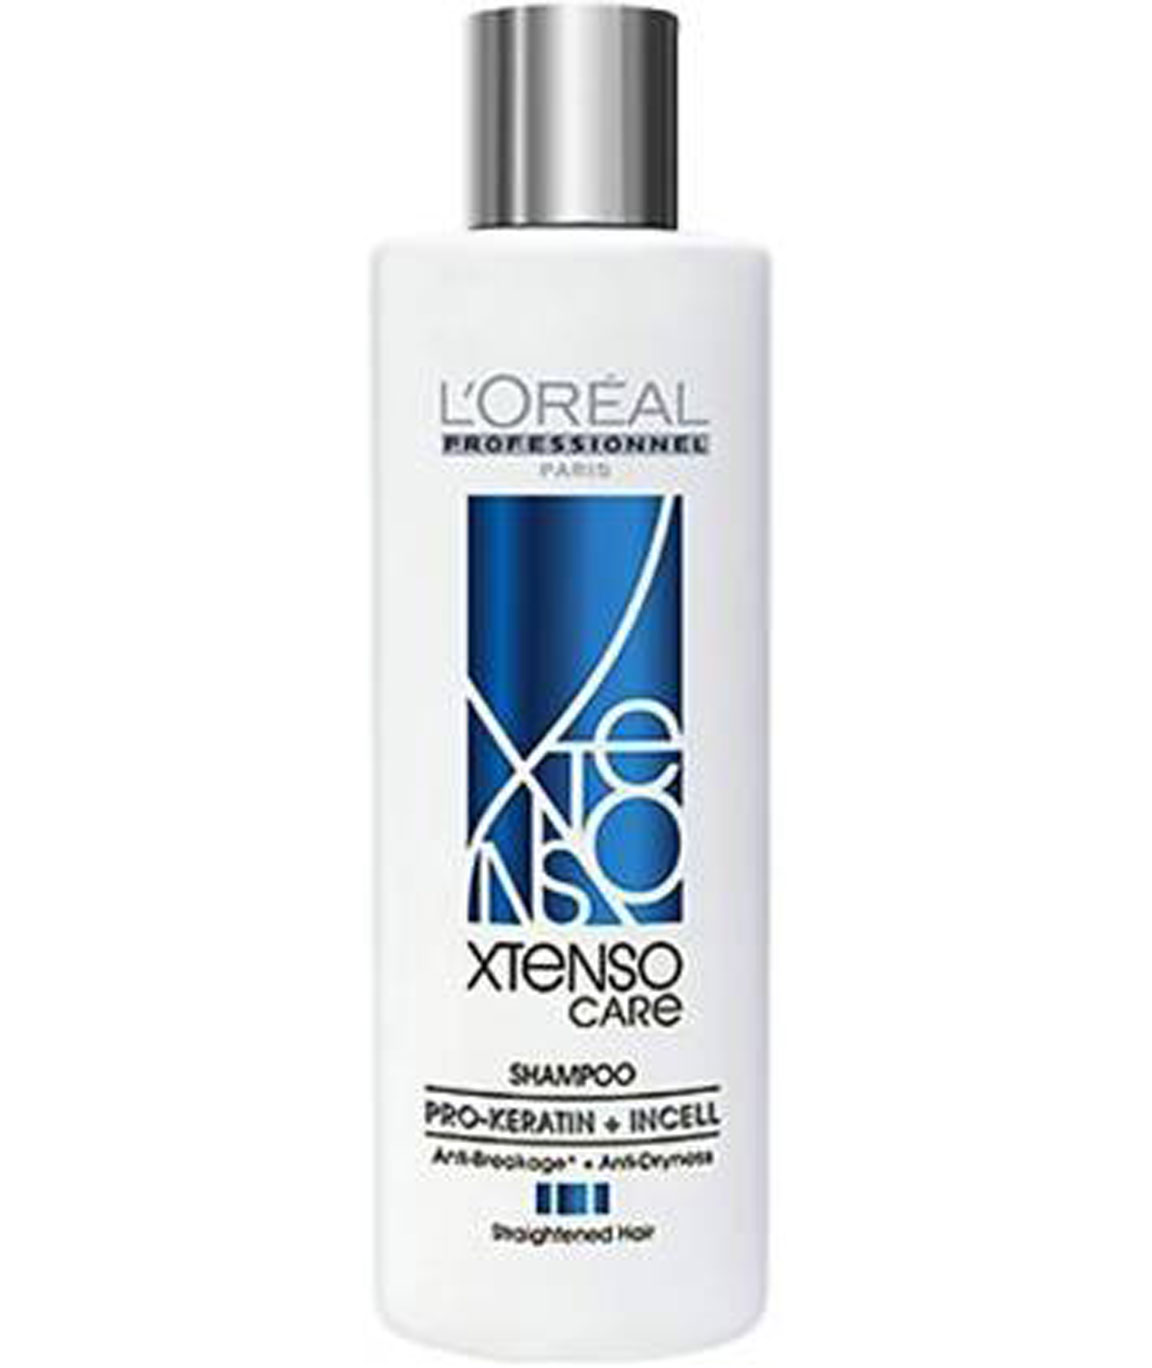 L`Oreal Professionnel XTenso Care Pro-Keratin + Incell Hair Straightening  Shampoo (250ml)